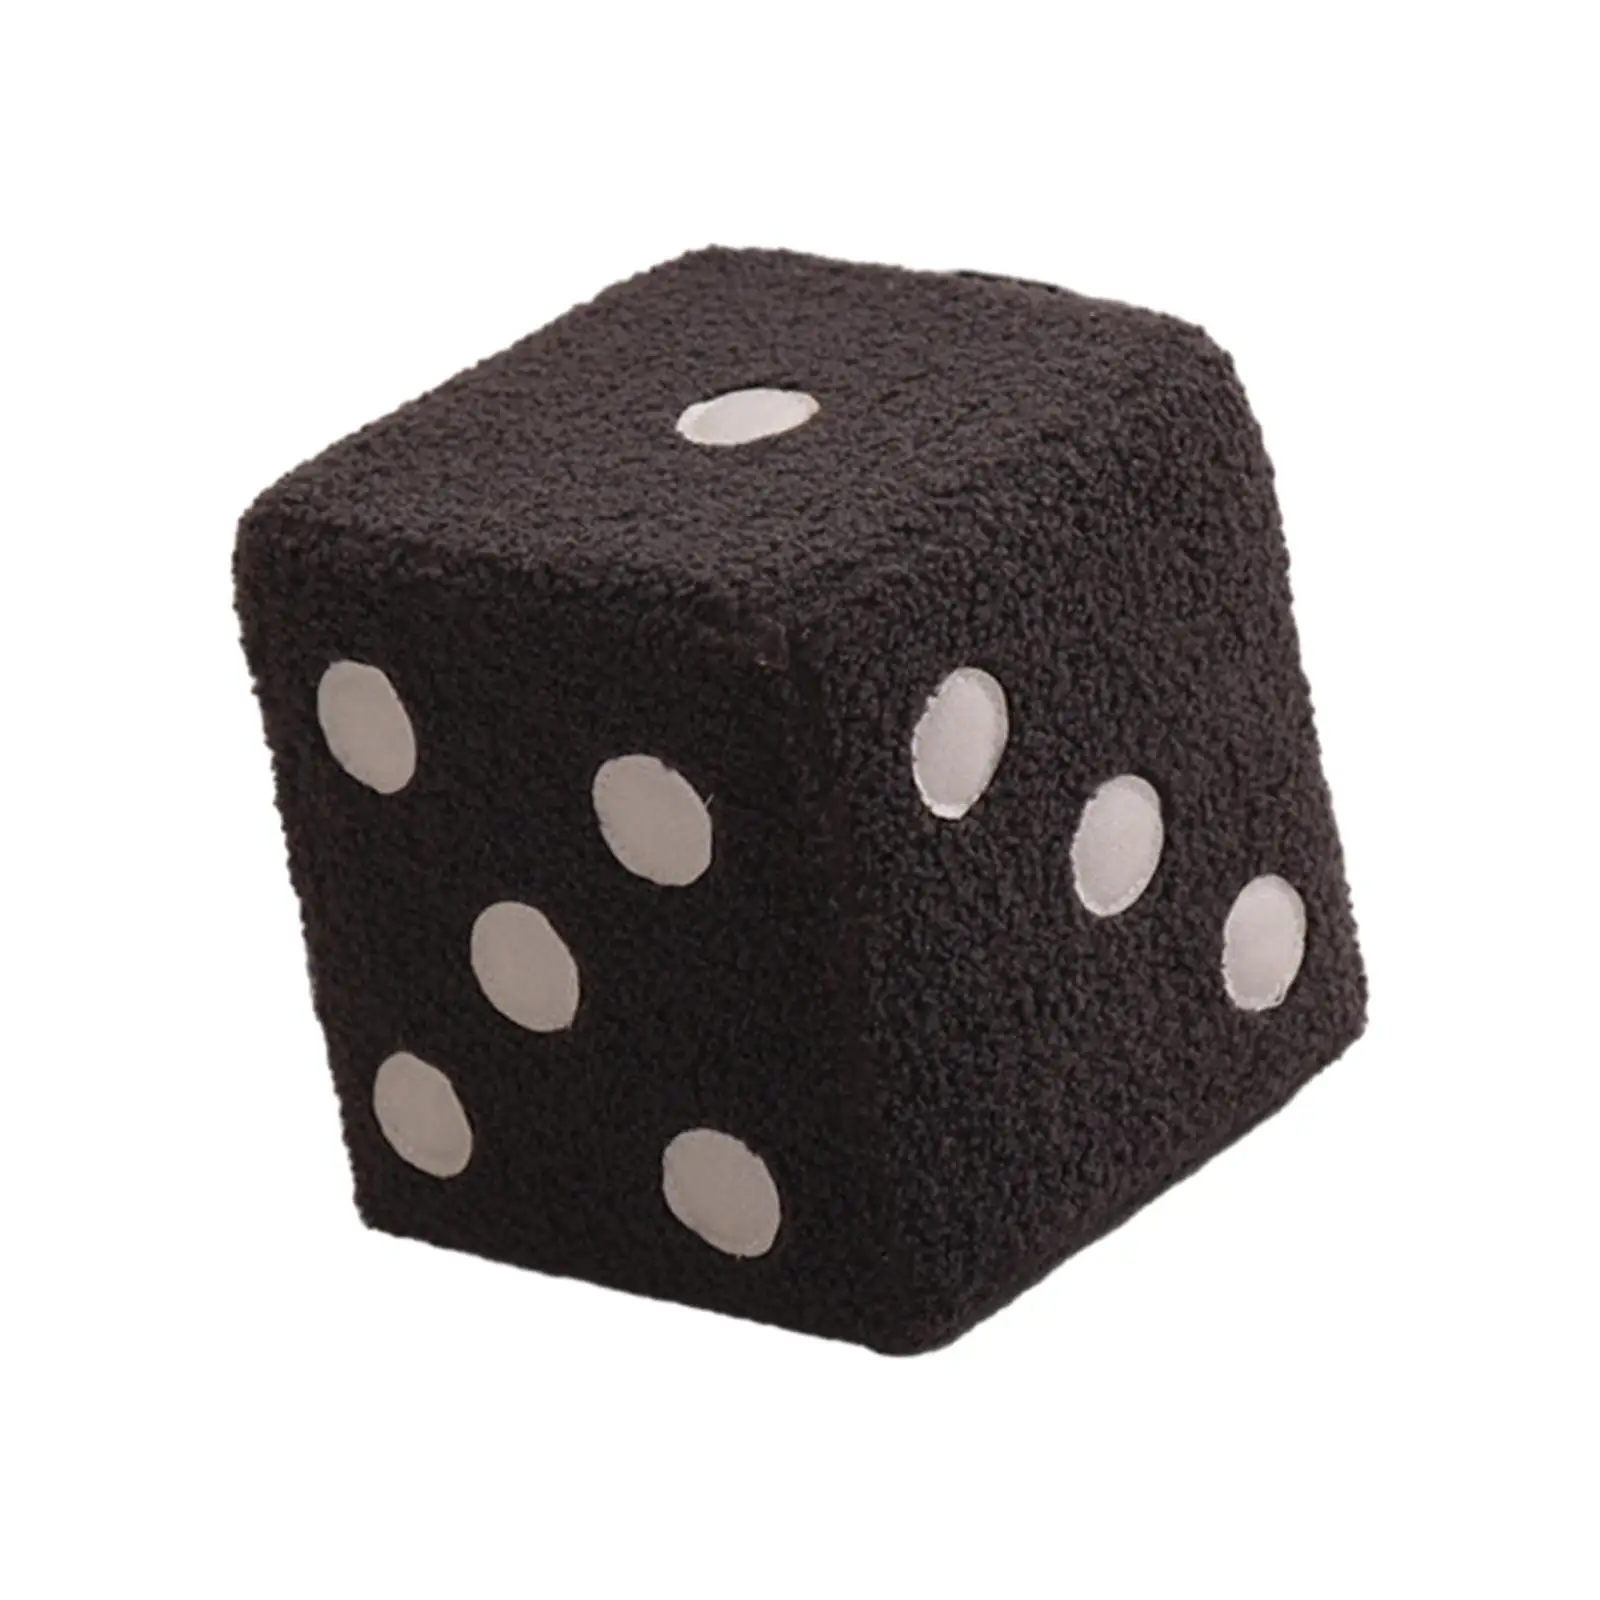 Dice Cube Ottoman, Dice Cubic Foot Stool, Small Non Skid Furniture Sturdy Base Foot Rest for Apartment Entryway Bedroom Couch